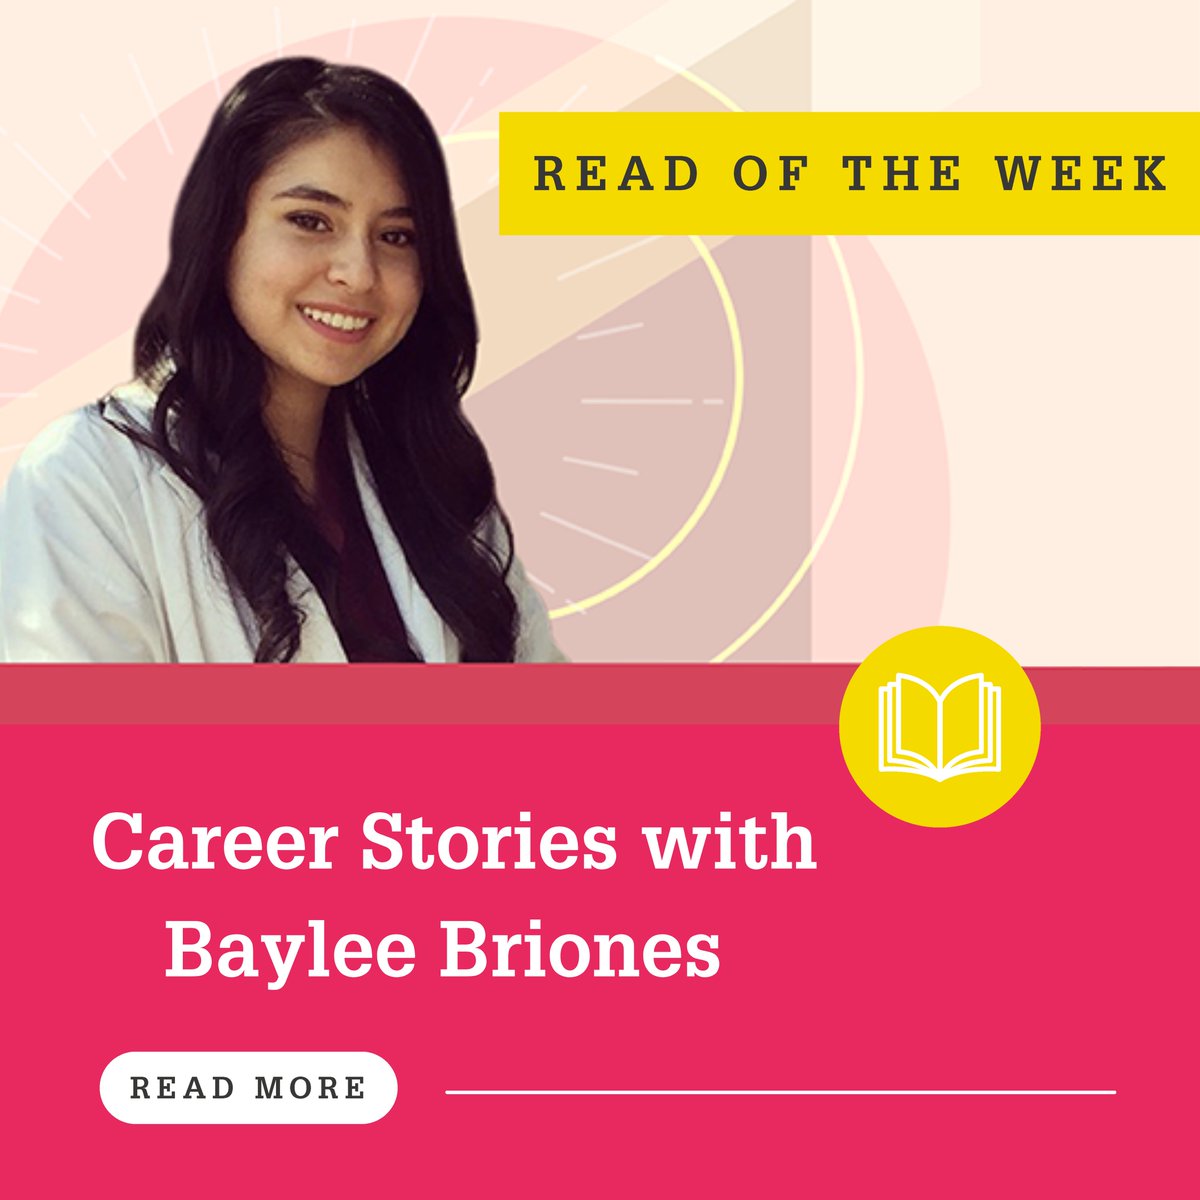 In the next part of our Career Stories series, Baylee Briones shares her journey to becoming a travelling medical laboratory scientist and the unique experiences encountered along the way 🌎

Check it out as our #ReadoftheWeek below! 🥼

bit.ly/3GlWRoH

#MedLab